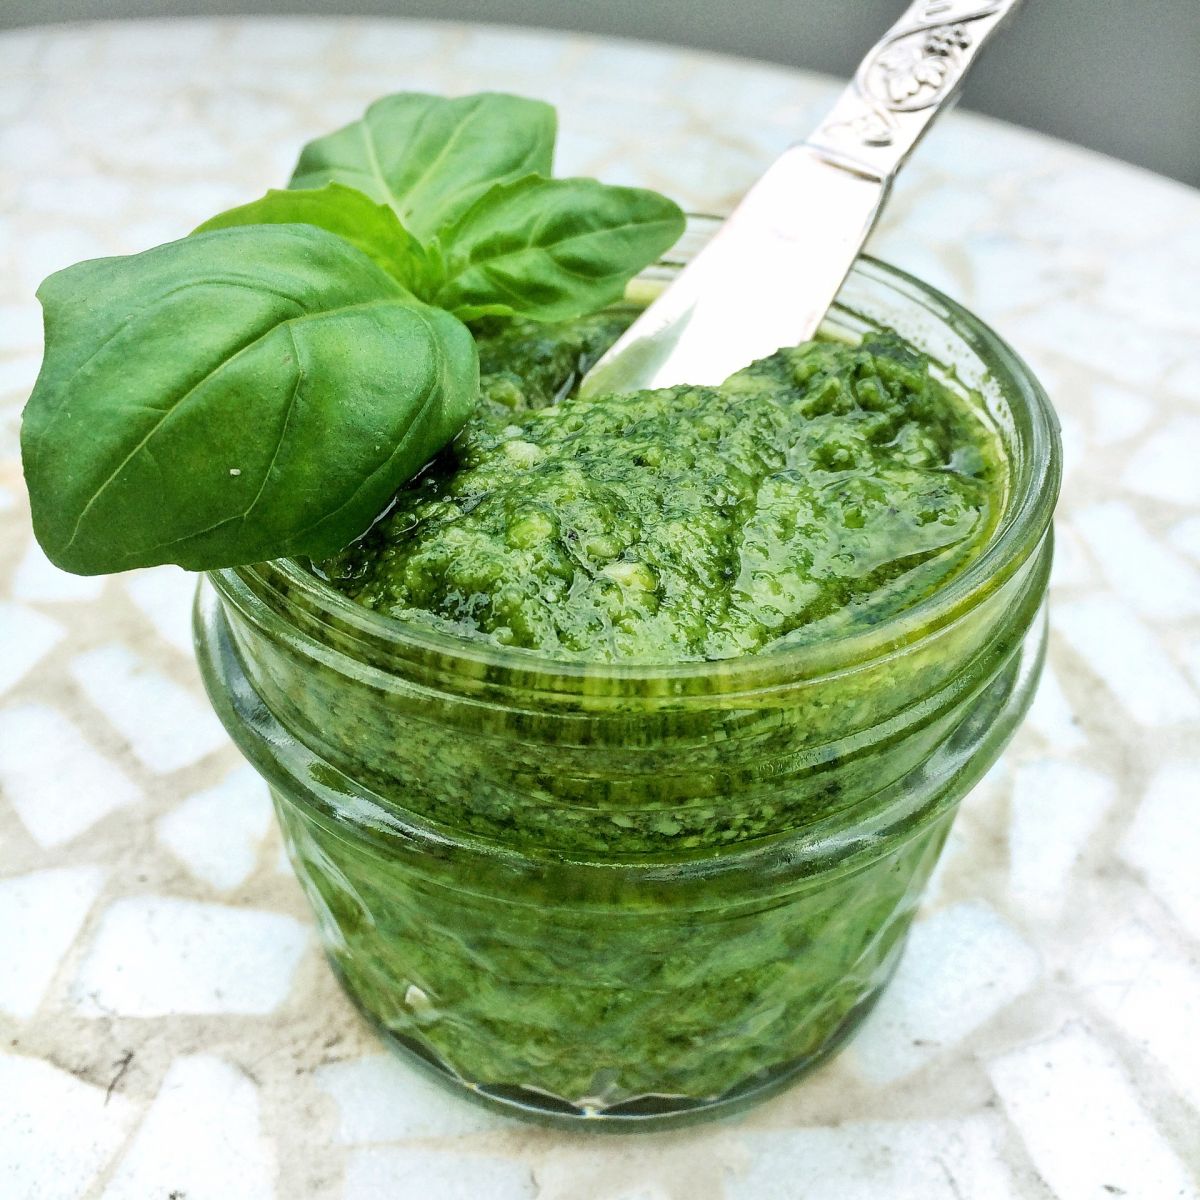 Pesto in a jar. Image by T Caesar from Pixabay